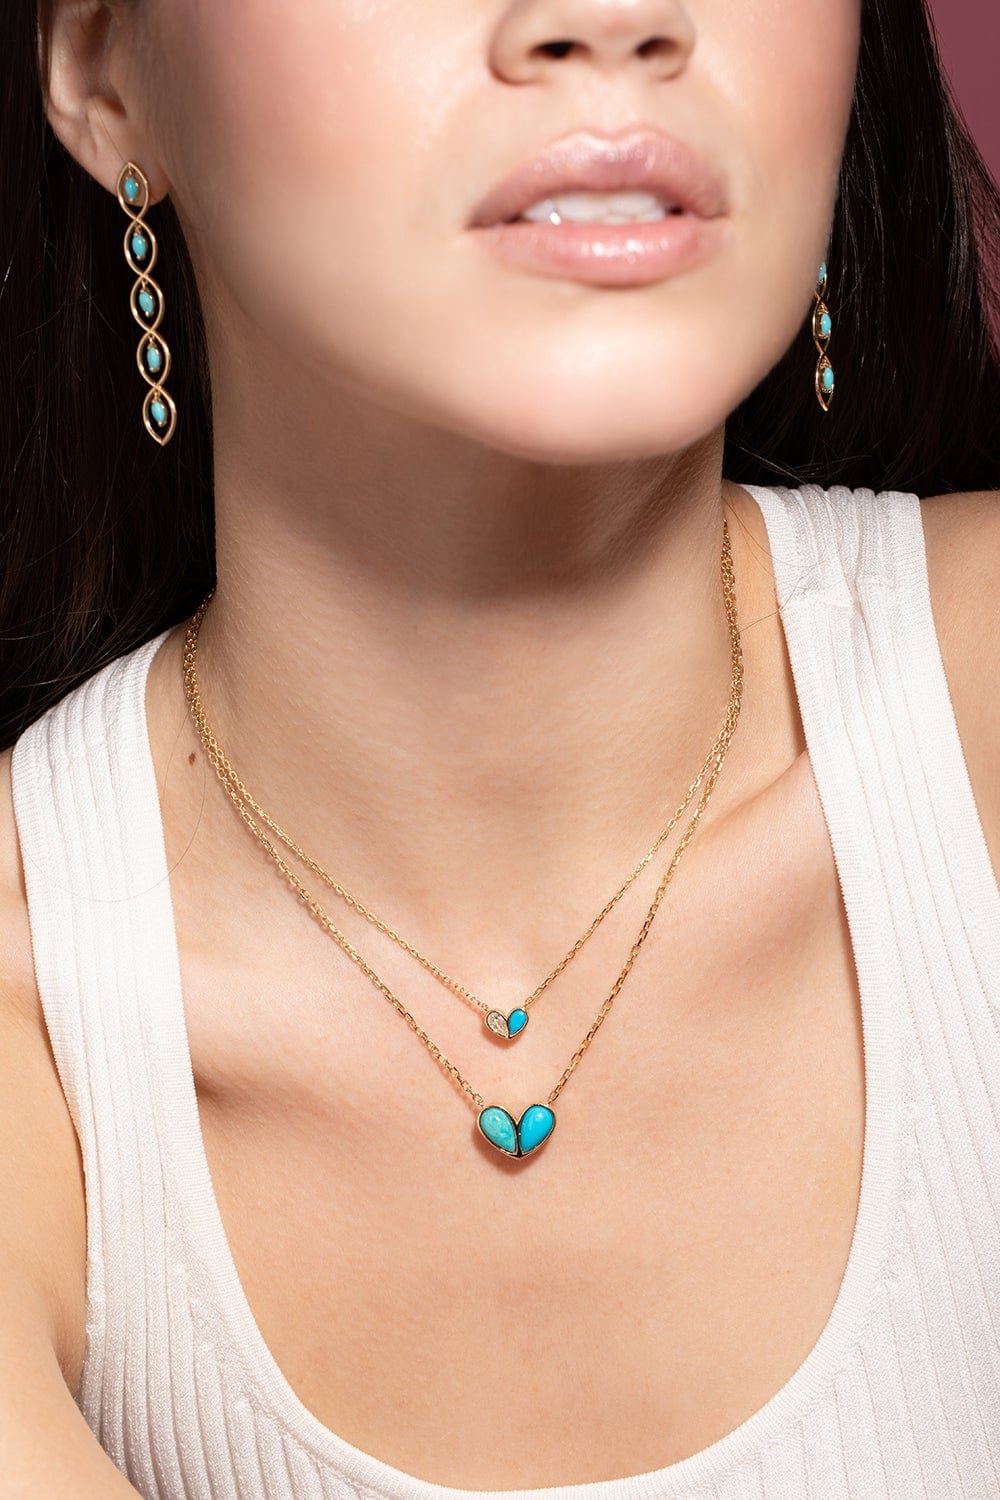 GEMELLA JEWELS-Diamond and Turquoise Sweetheart Necklace-YELLOW GOLD